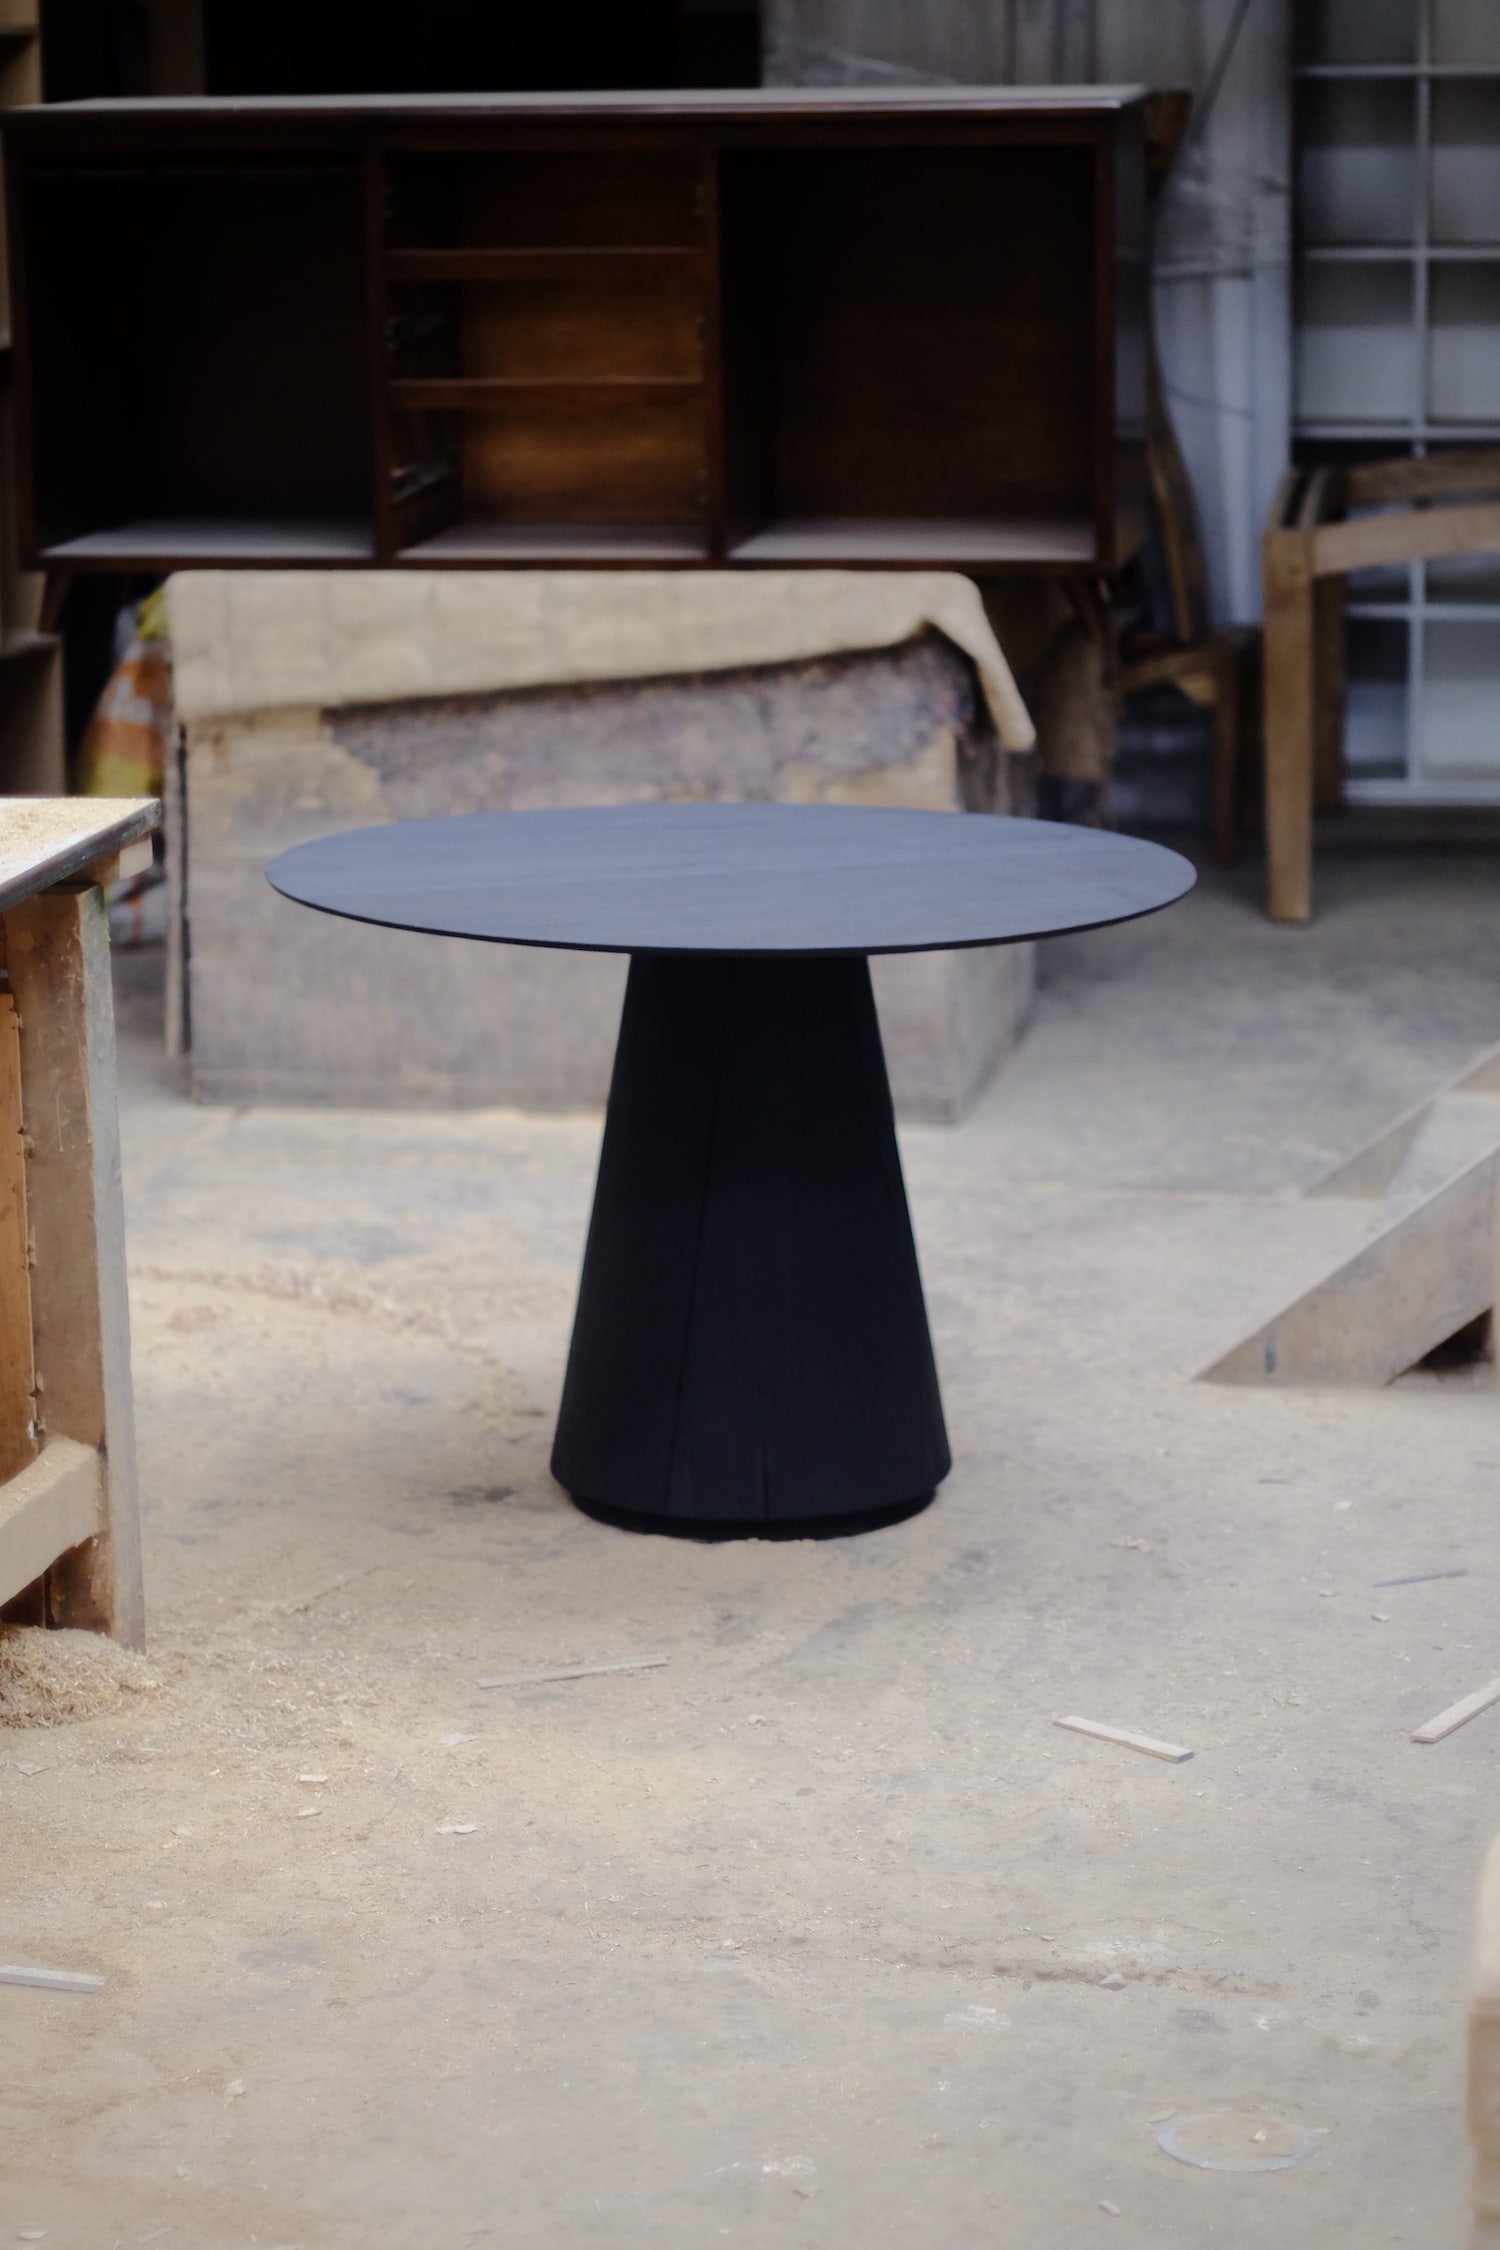  A dining table with strong design elements from mid-century and organic minimalism, the Table Amok features an inverted tapered pedestal base and uncluttered oval surface.